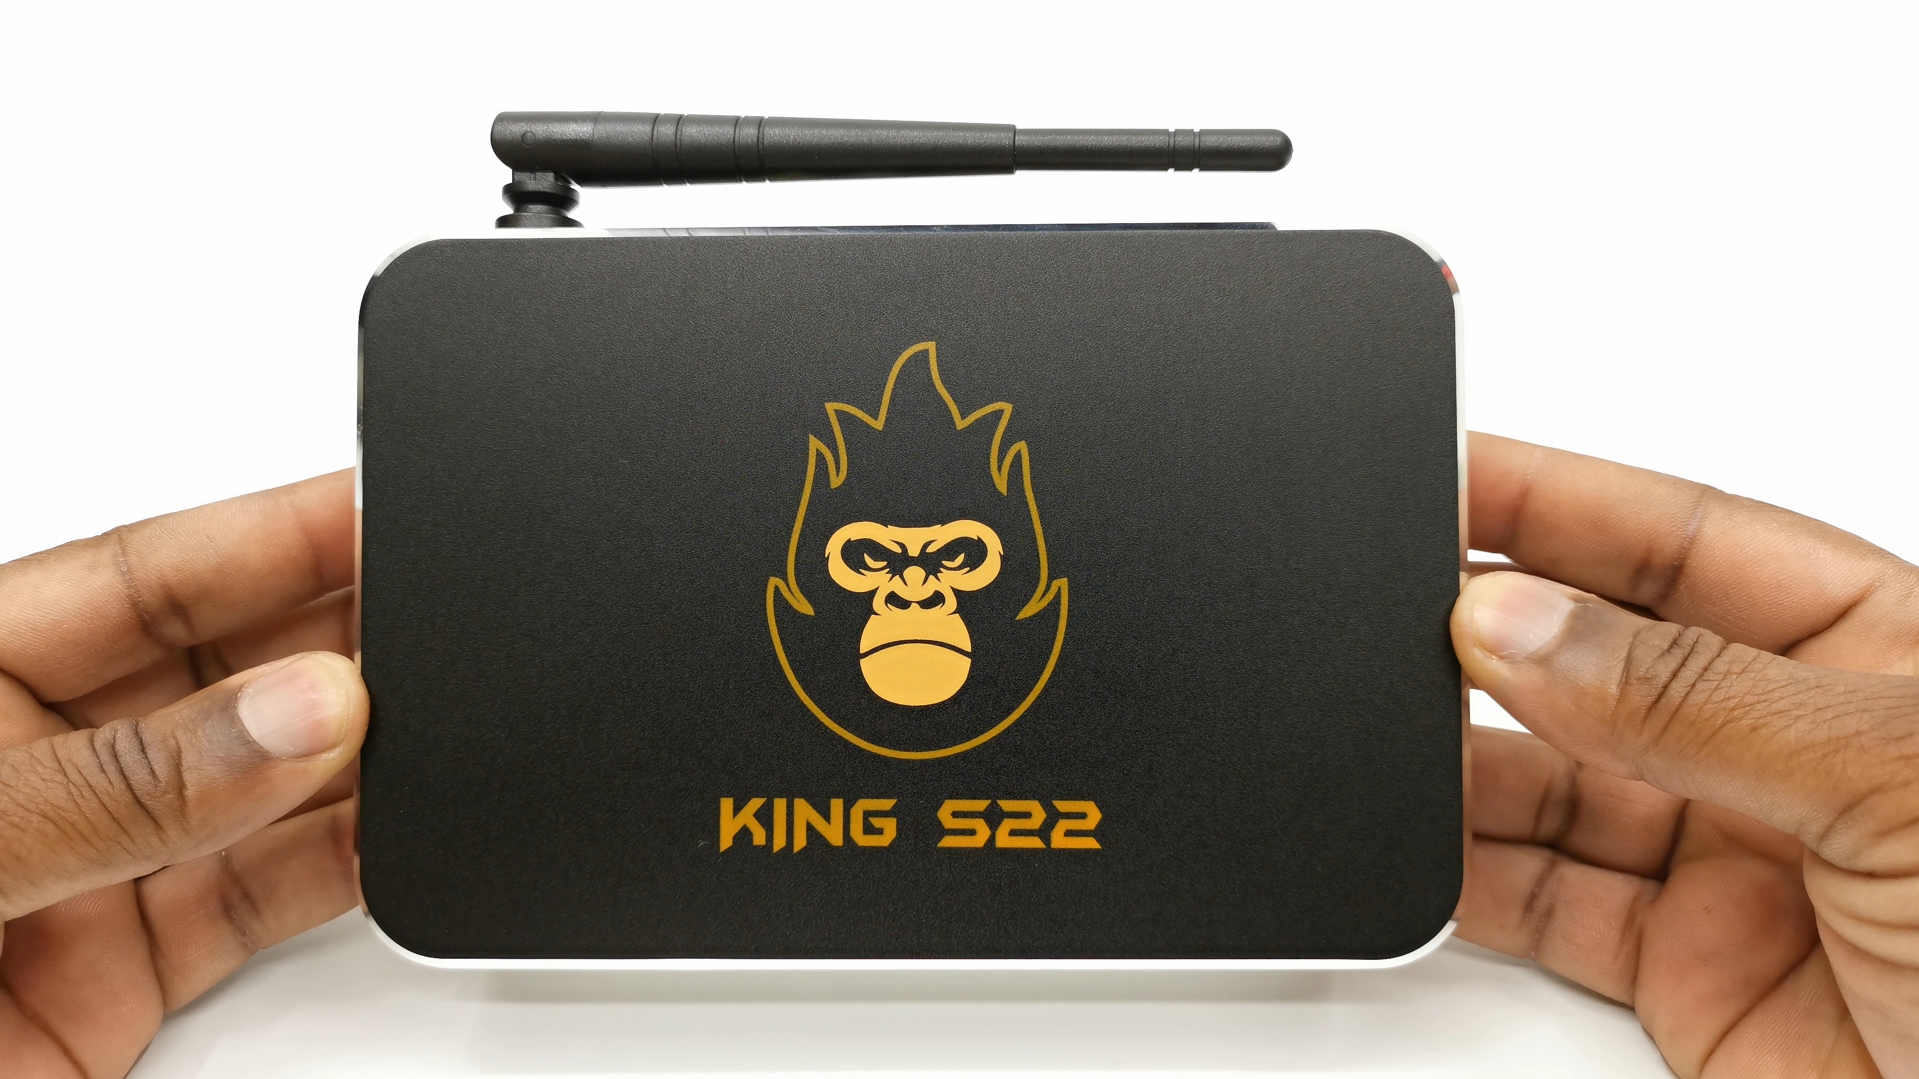 Zoomtak King S22 TV Box Top view